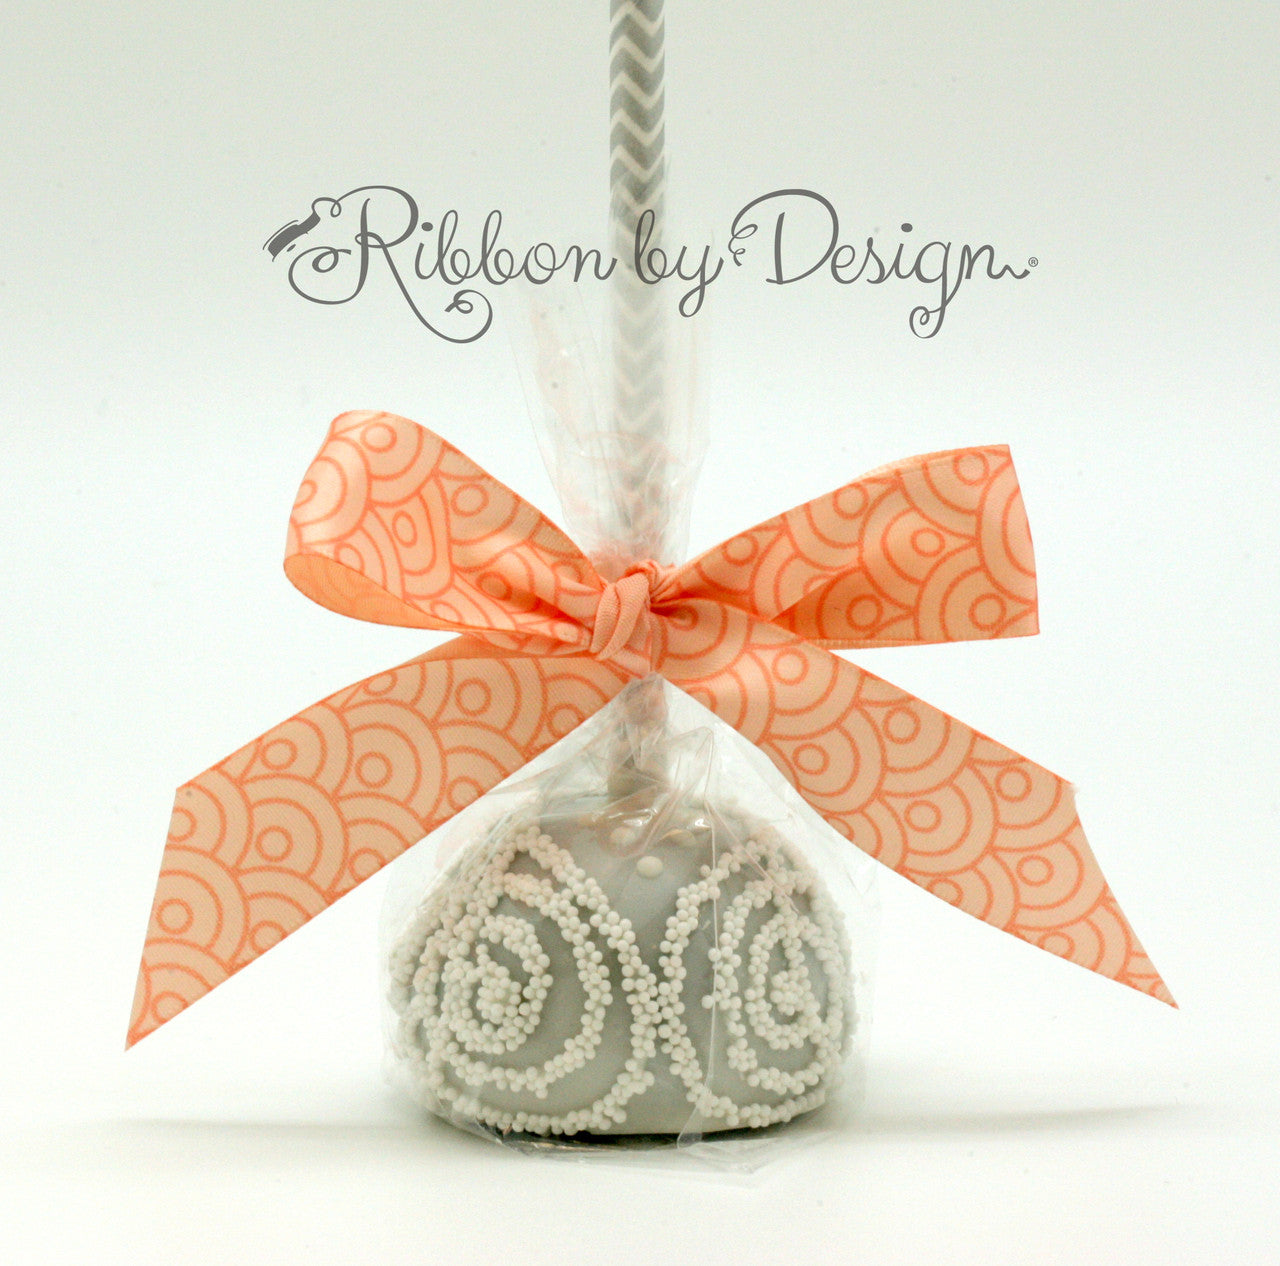 This pretty little cake pop is all dressed up in our peach fish scale ribbon and ready to be presented to the wedding guests as favors! What a beautiful gift!